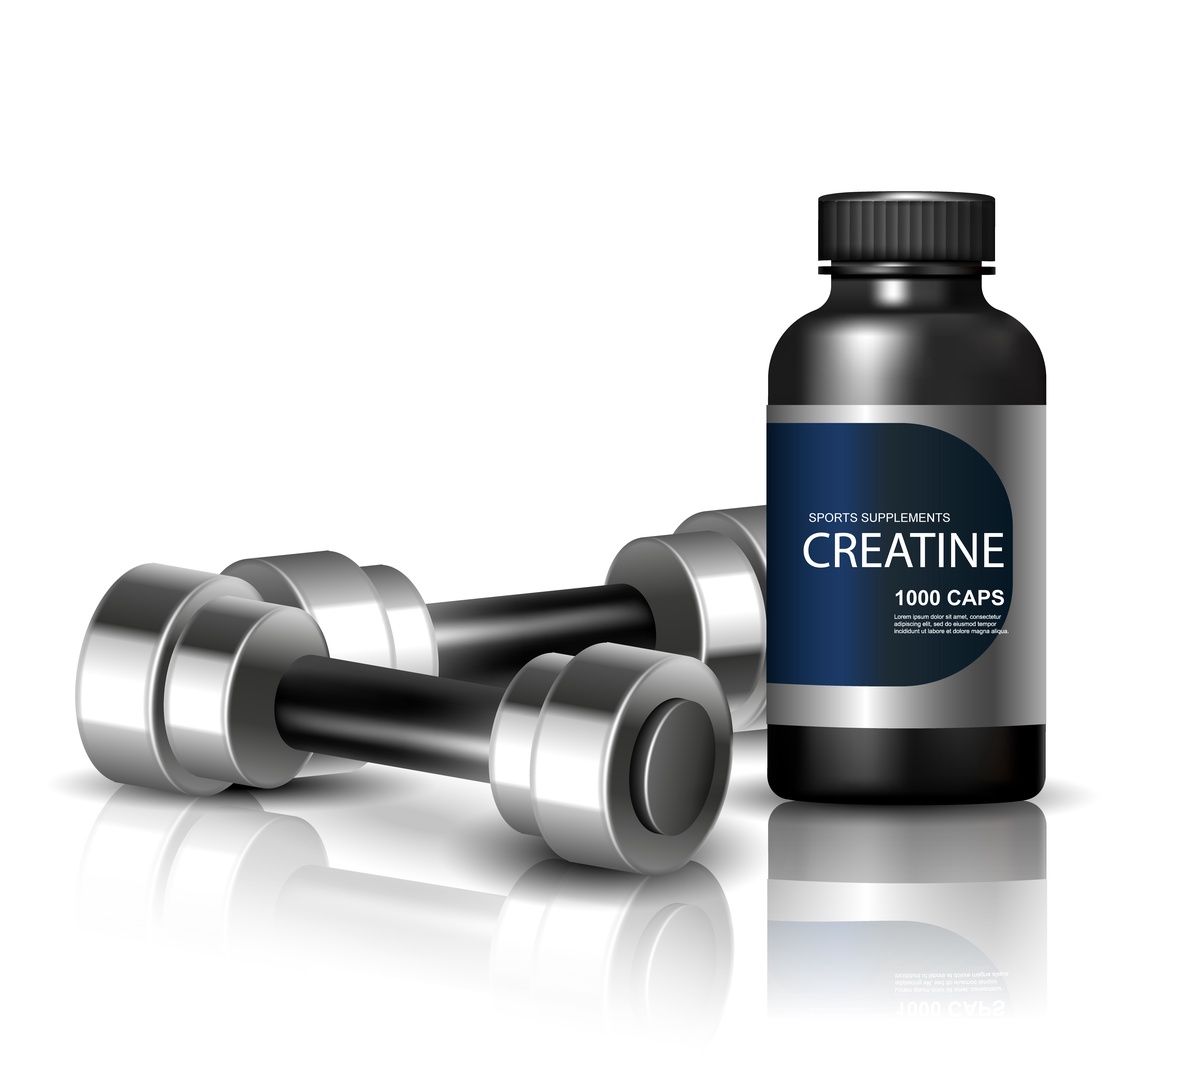 Creatine: The Key to Building Muscle and Strength